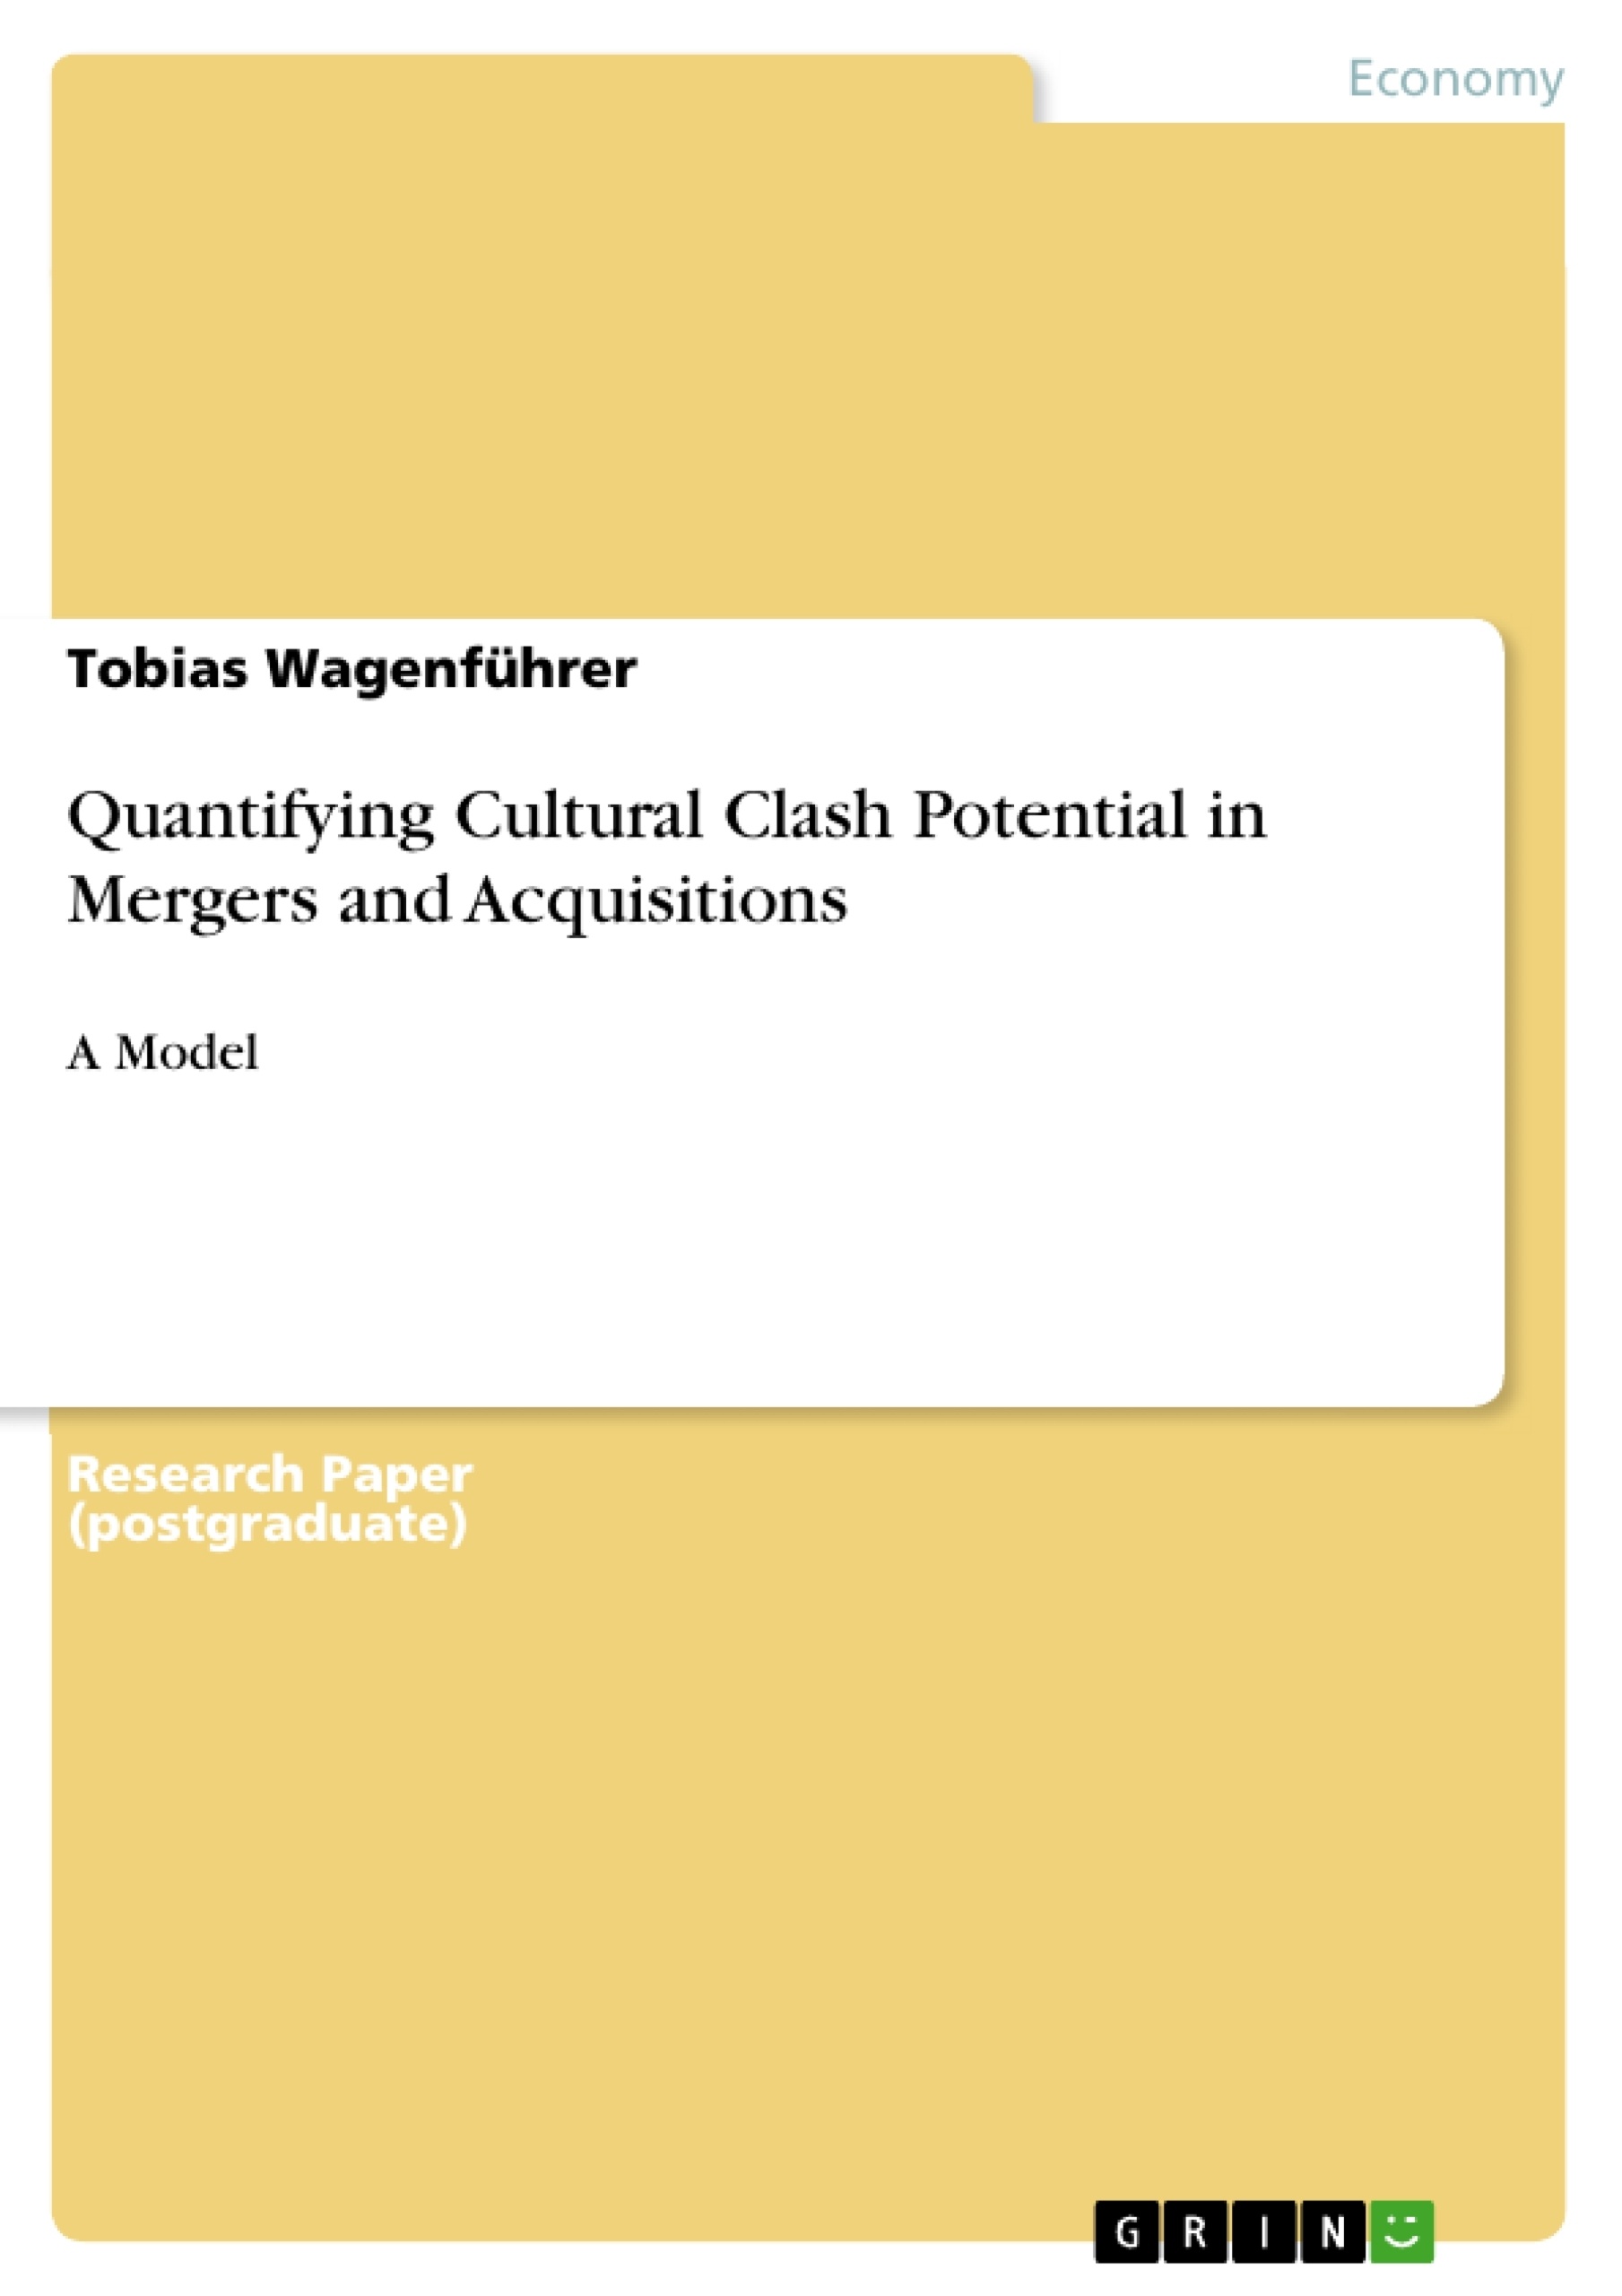 Titre: Quantifying Cultural Clash Potential in Mergers and Acquisitions